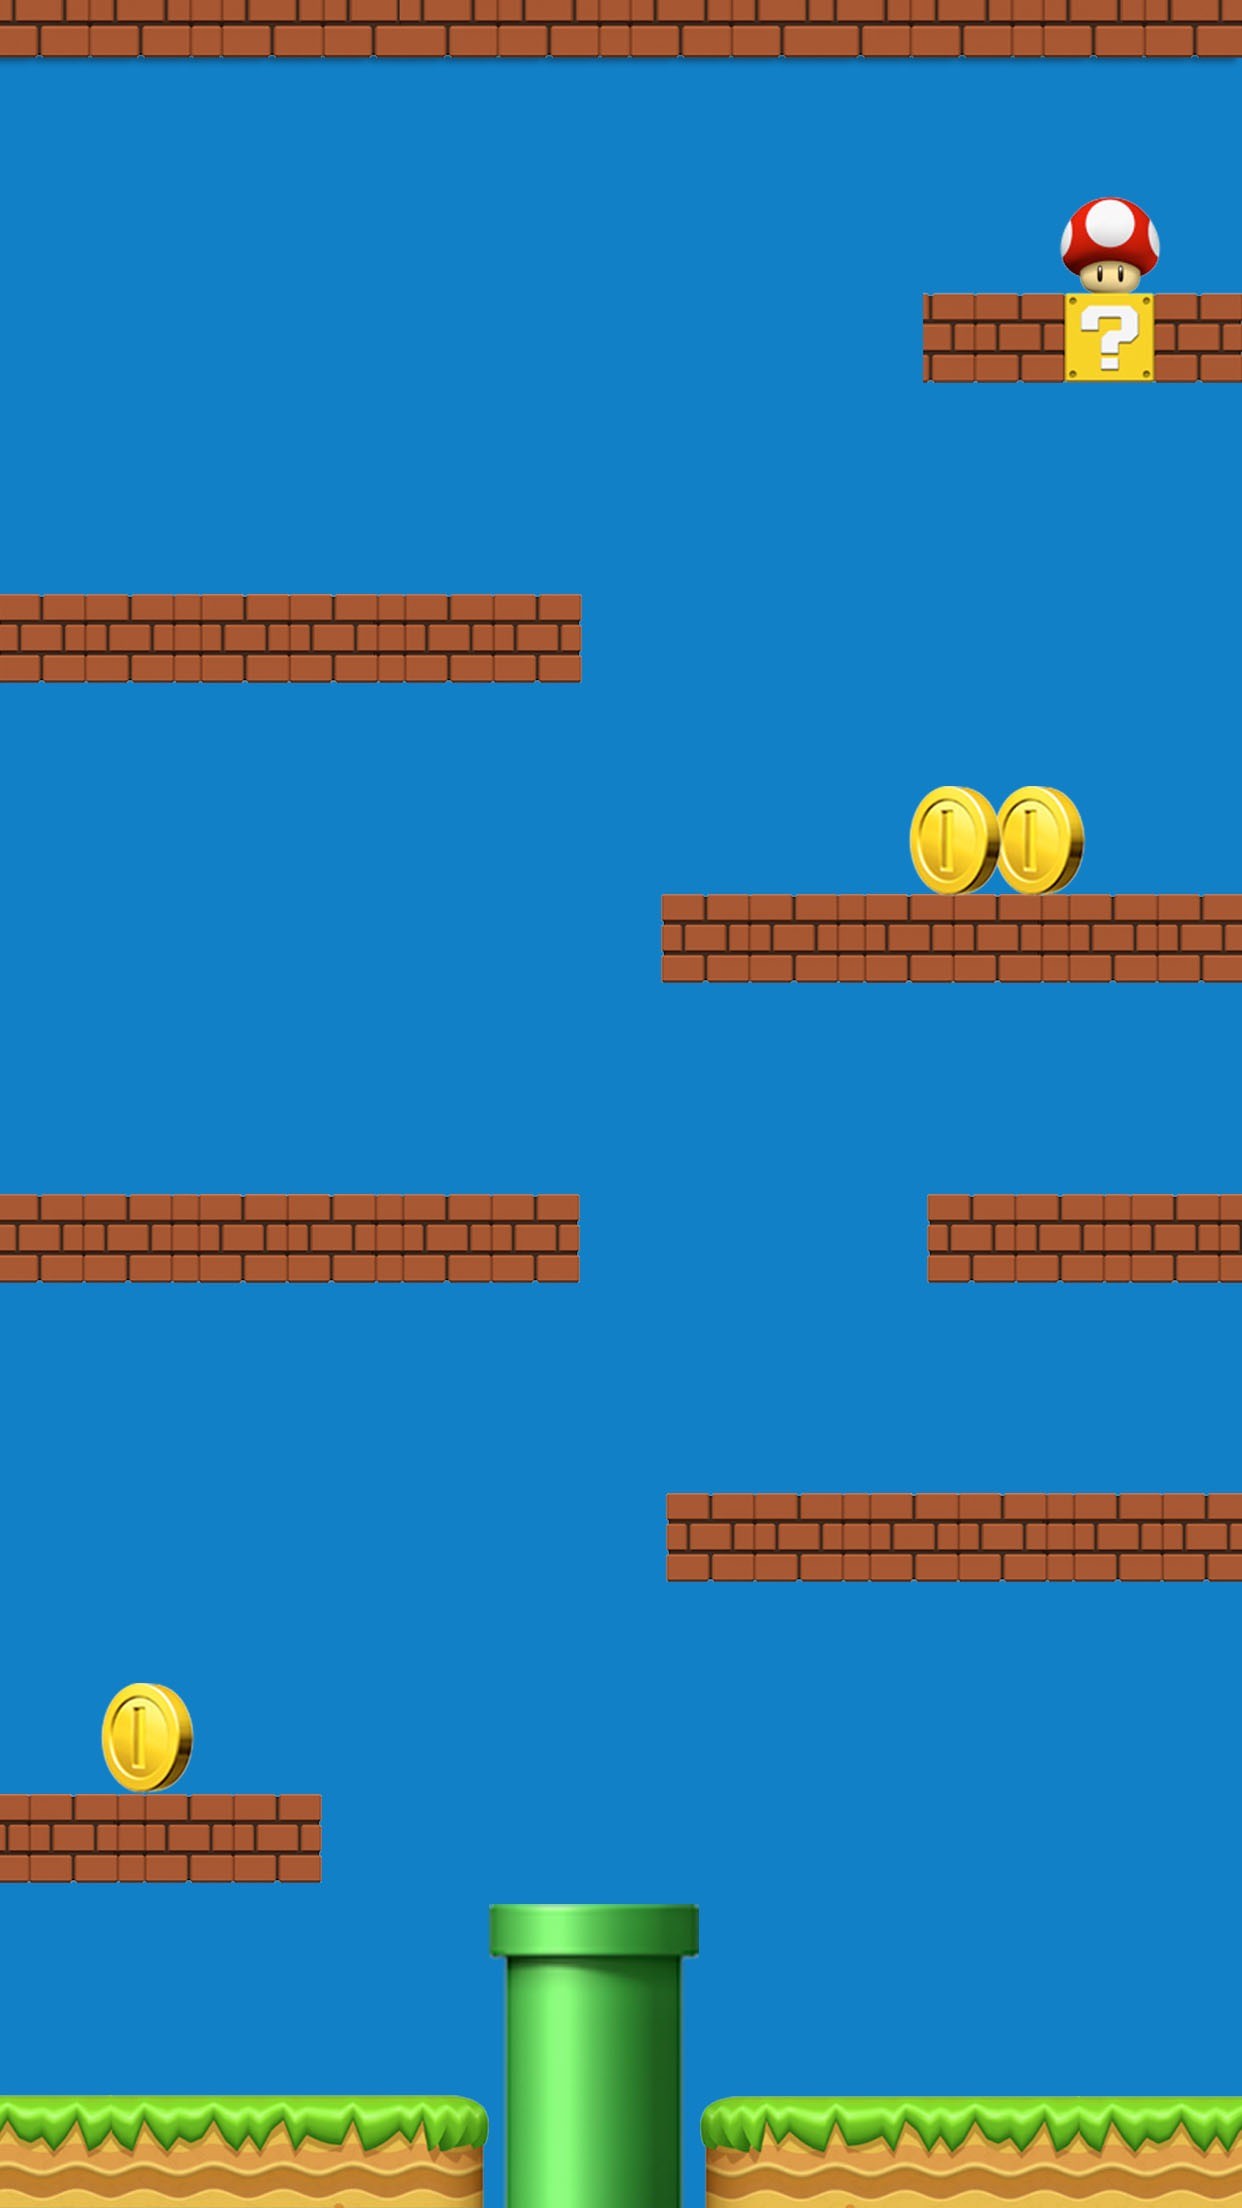 1242x2208 Shelves Super Mario Colorful Awesome Ð¡omputer Graphics. Iphone  BackgroundsWallpaper ...